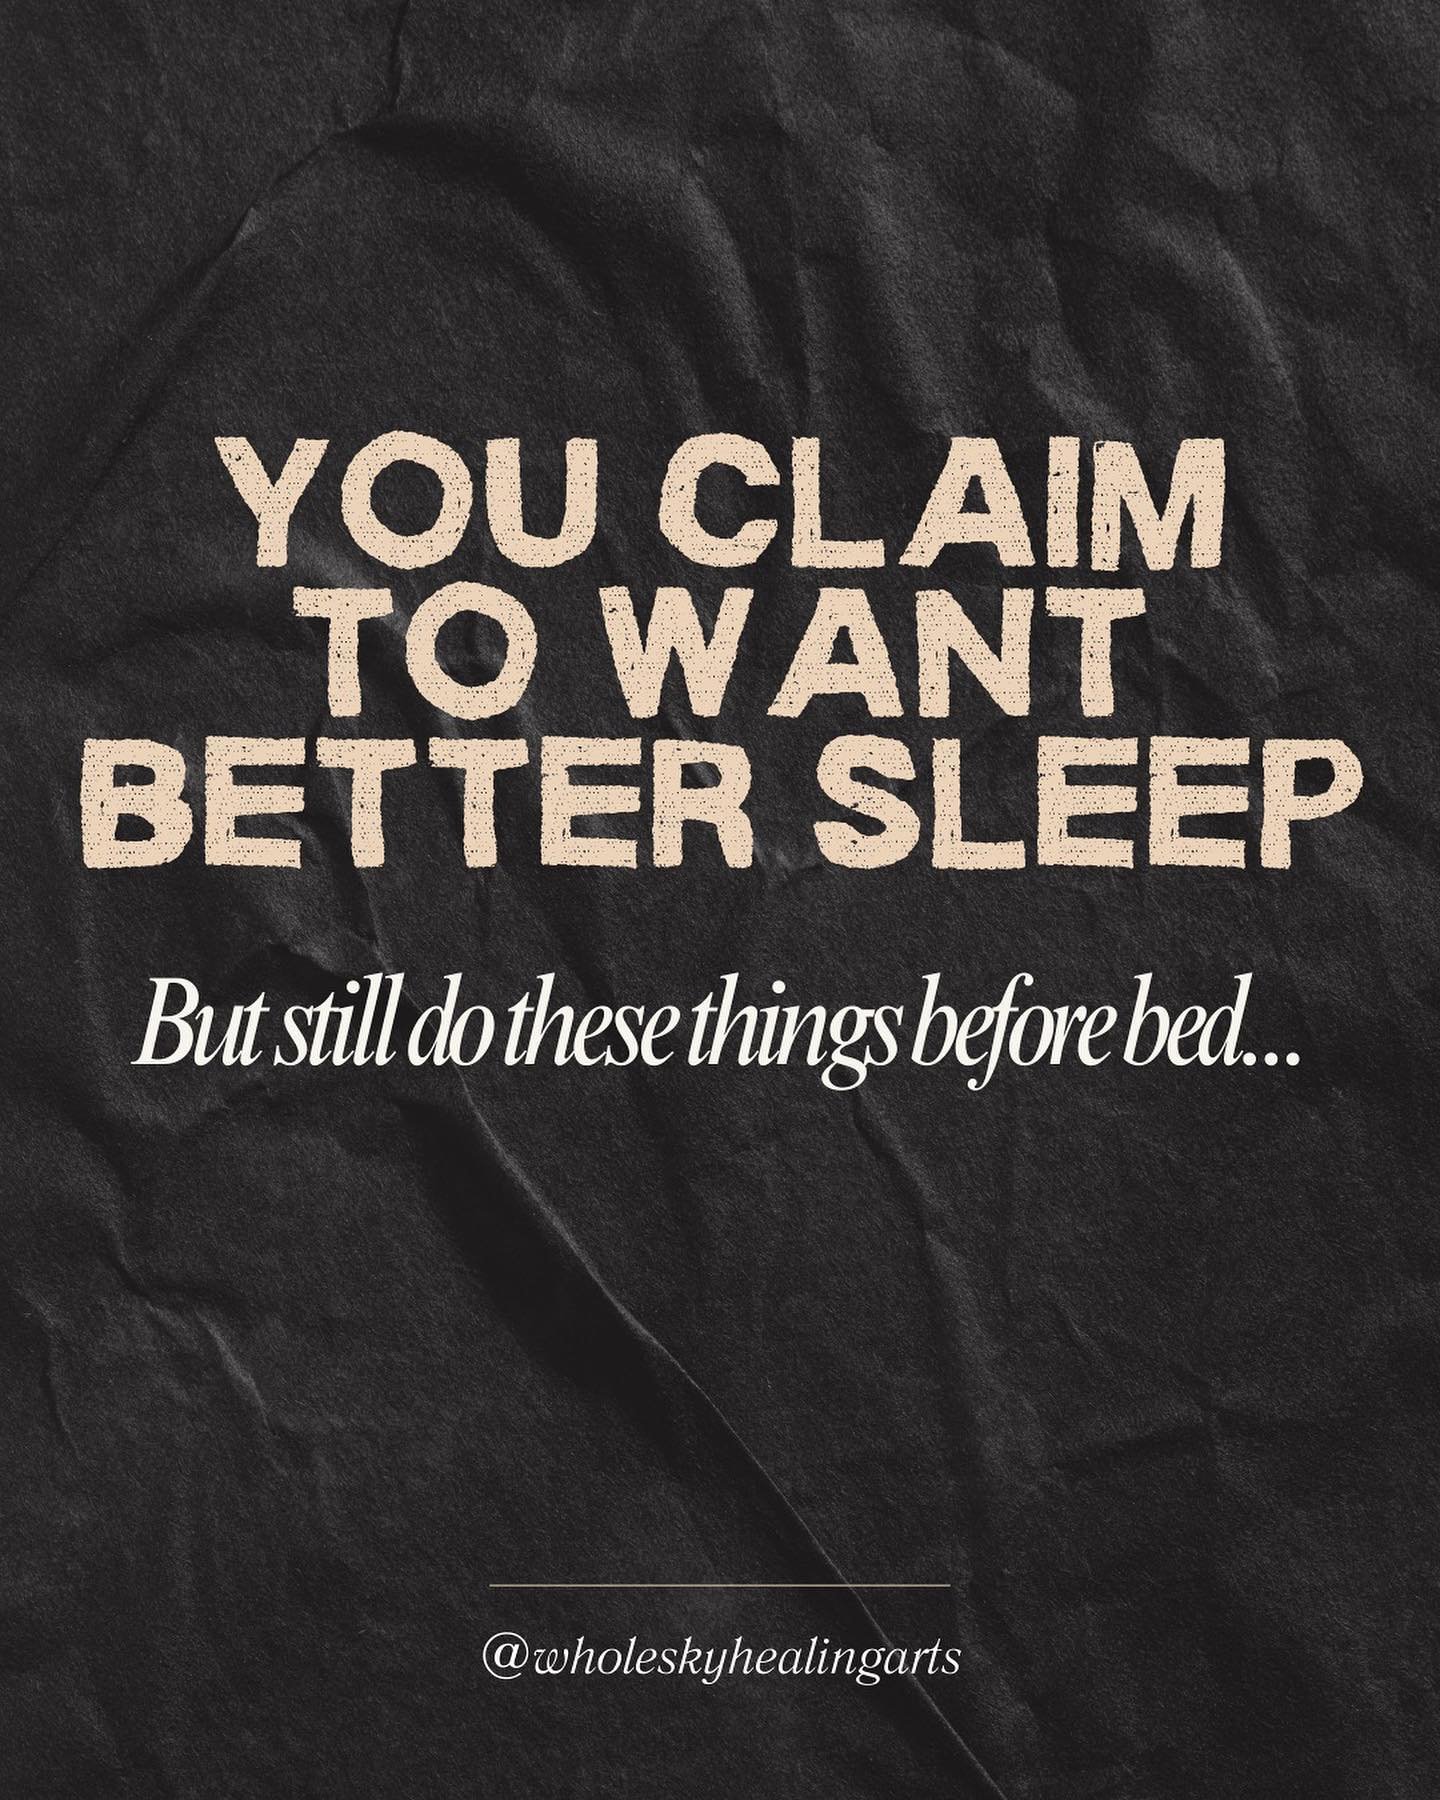 You claim to want better sleep 😴 

You can&rsquo;t say you&rsquo;ve done everything to get better sleep if you&rsquo;re still up to these bad habits.

Follow me to best insomnia &amp; regulate your nervous system. ❤️😘

#insomnia#sleeptips#healthy#v